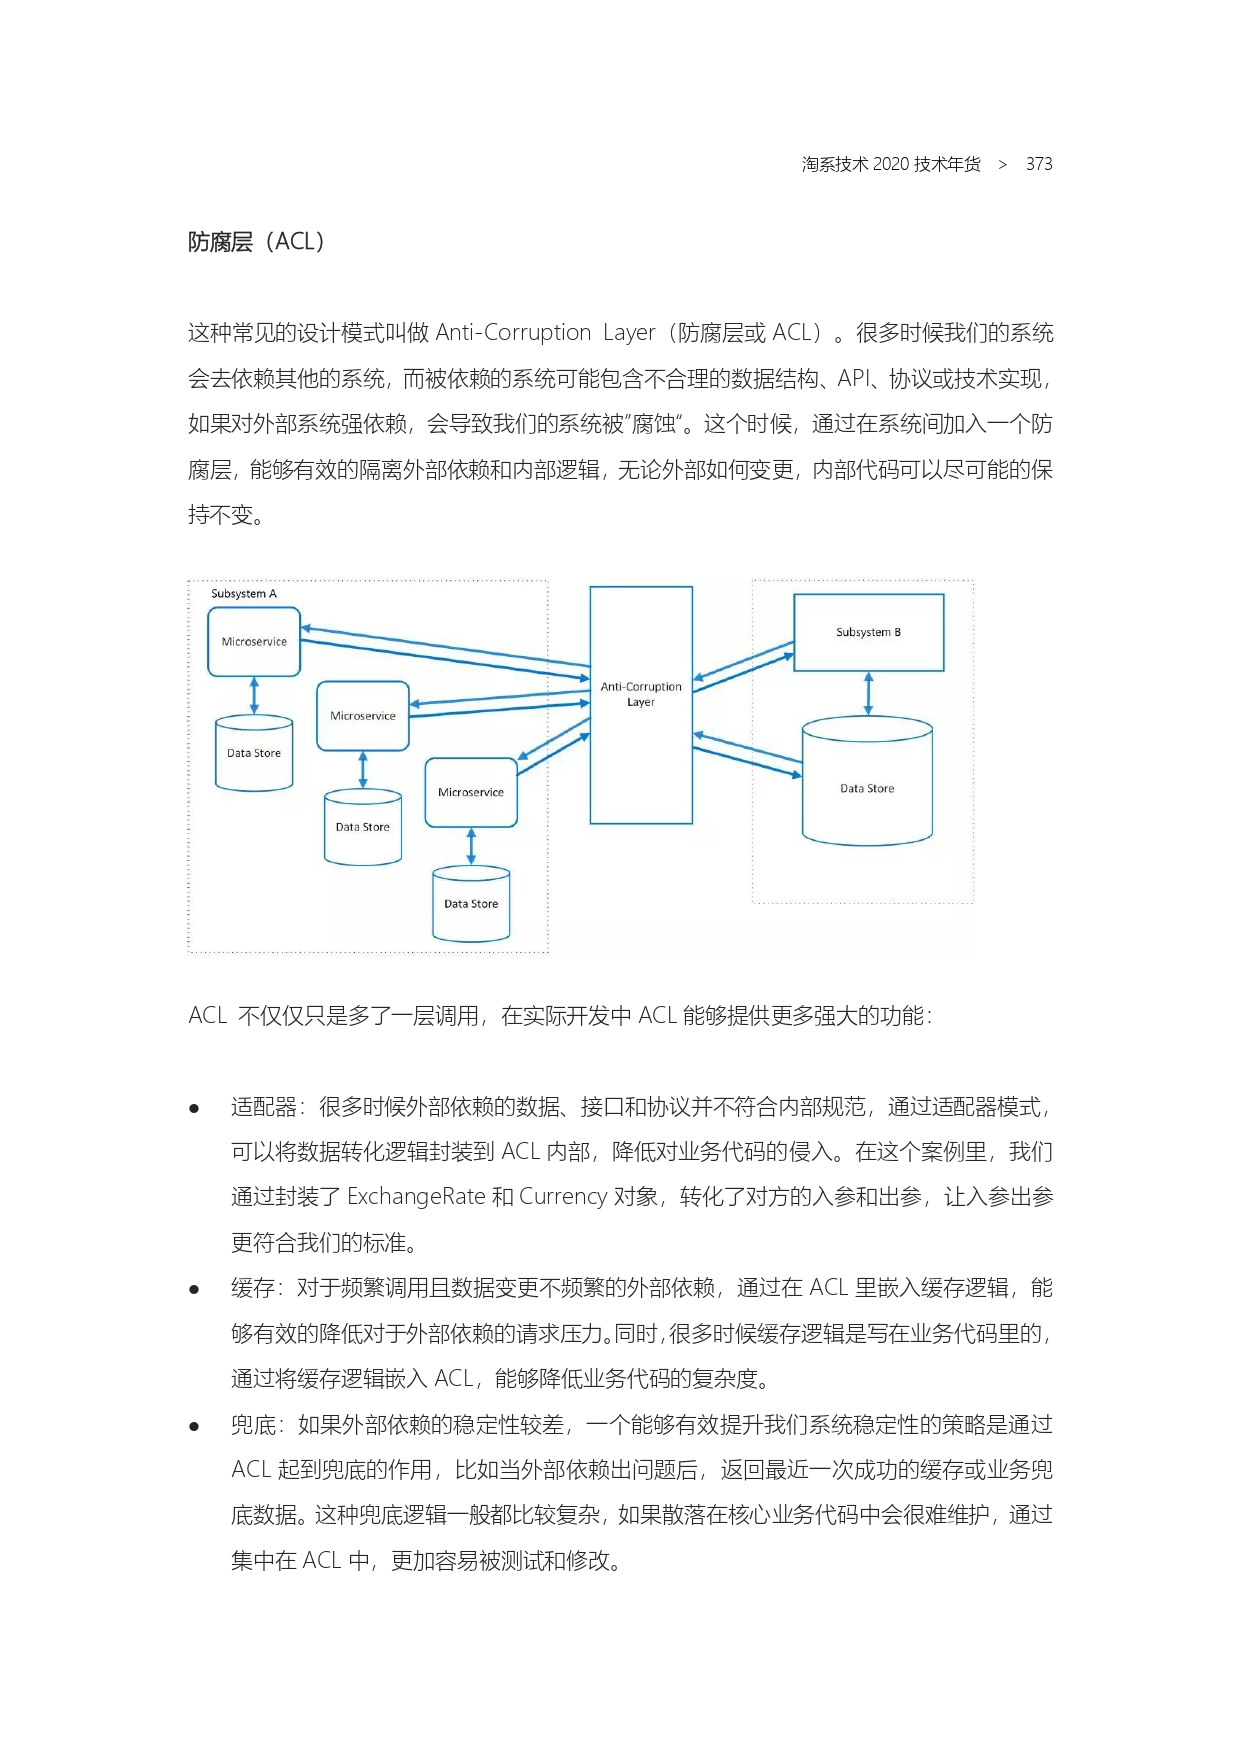 The Complete Works of Tao Technology 2020-1-570_page-0373.jpg